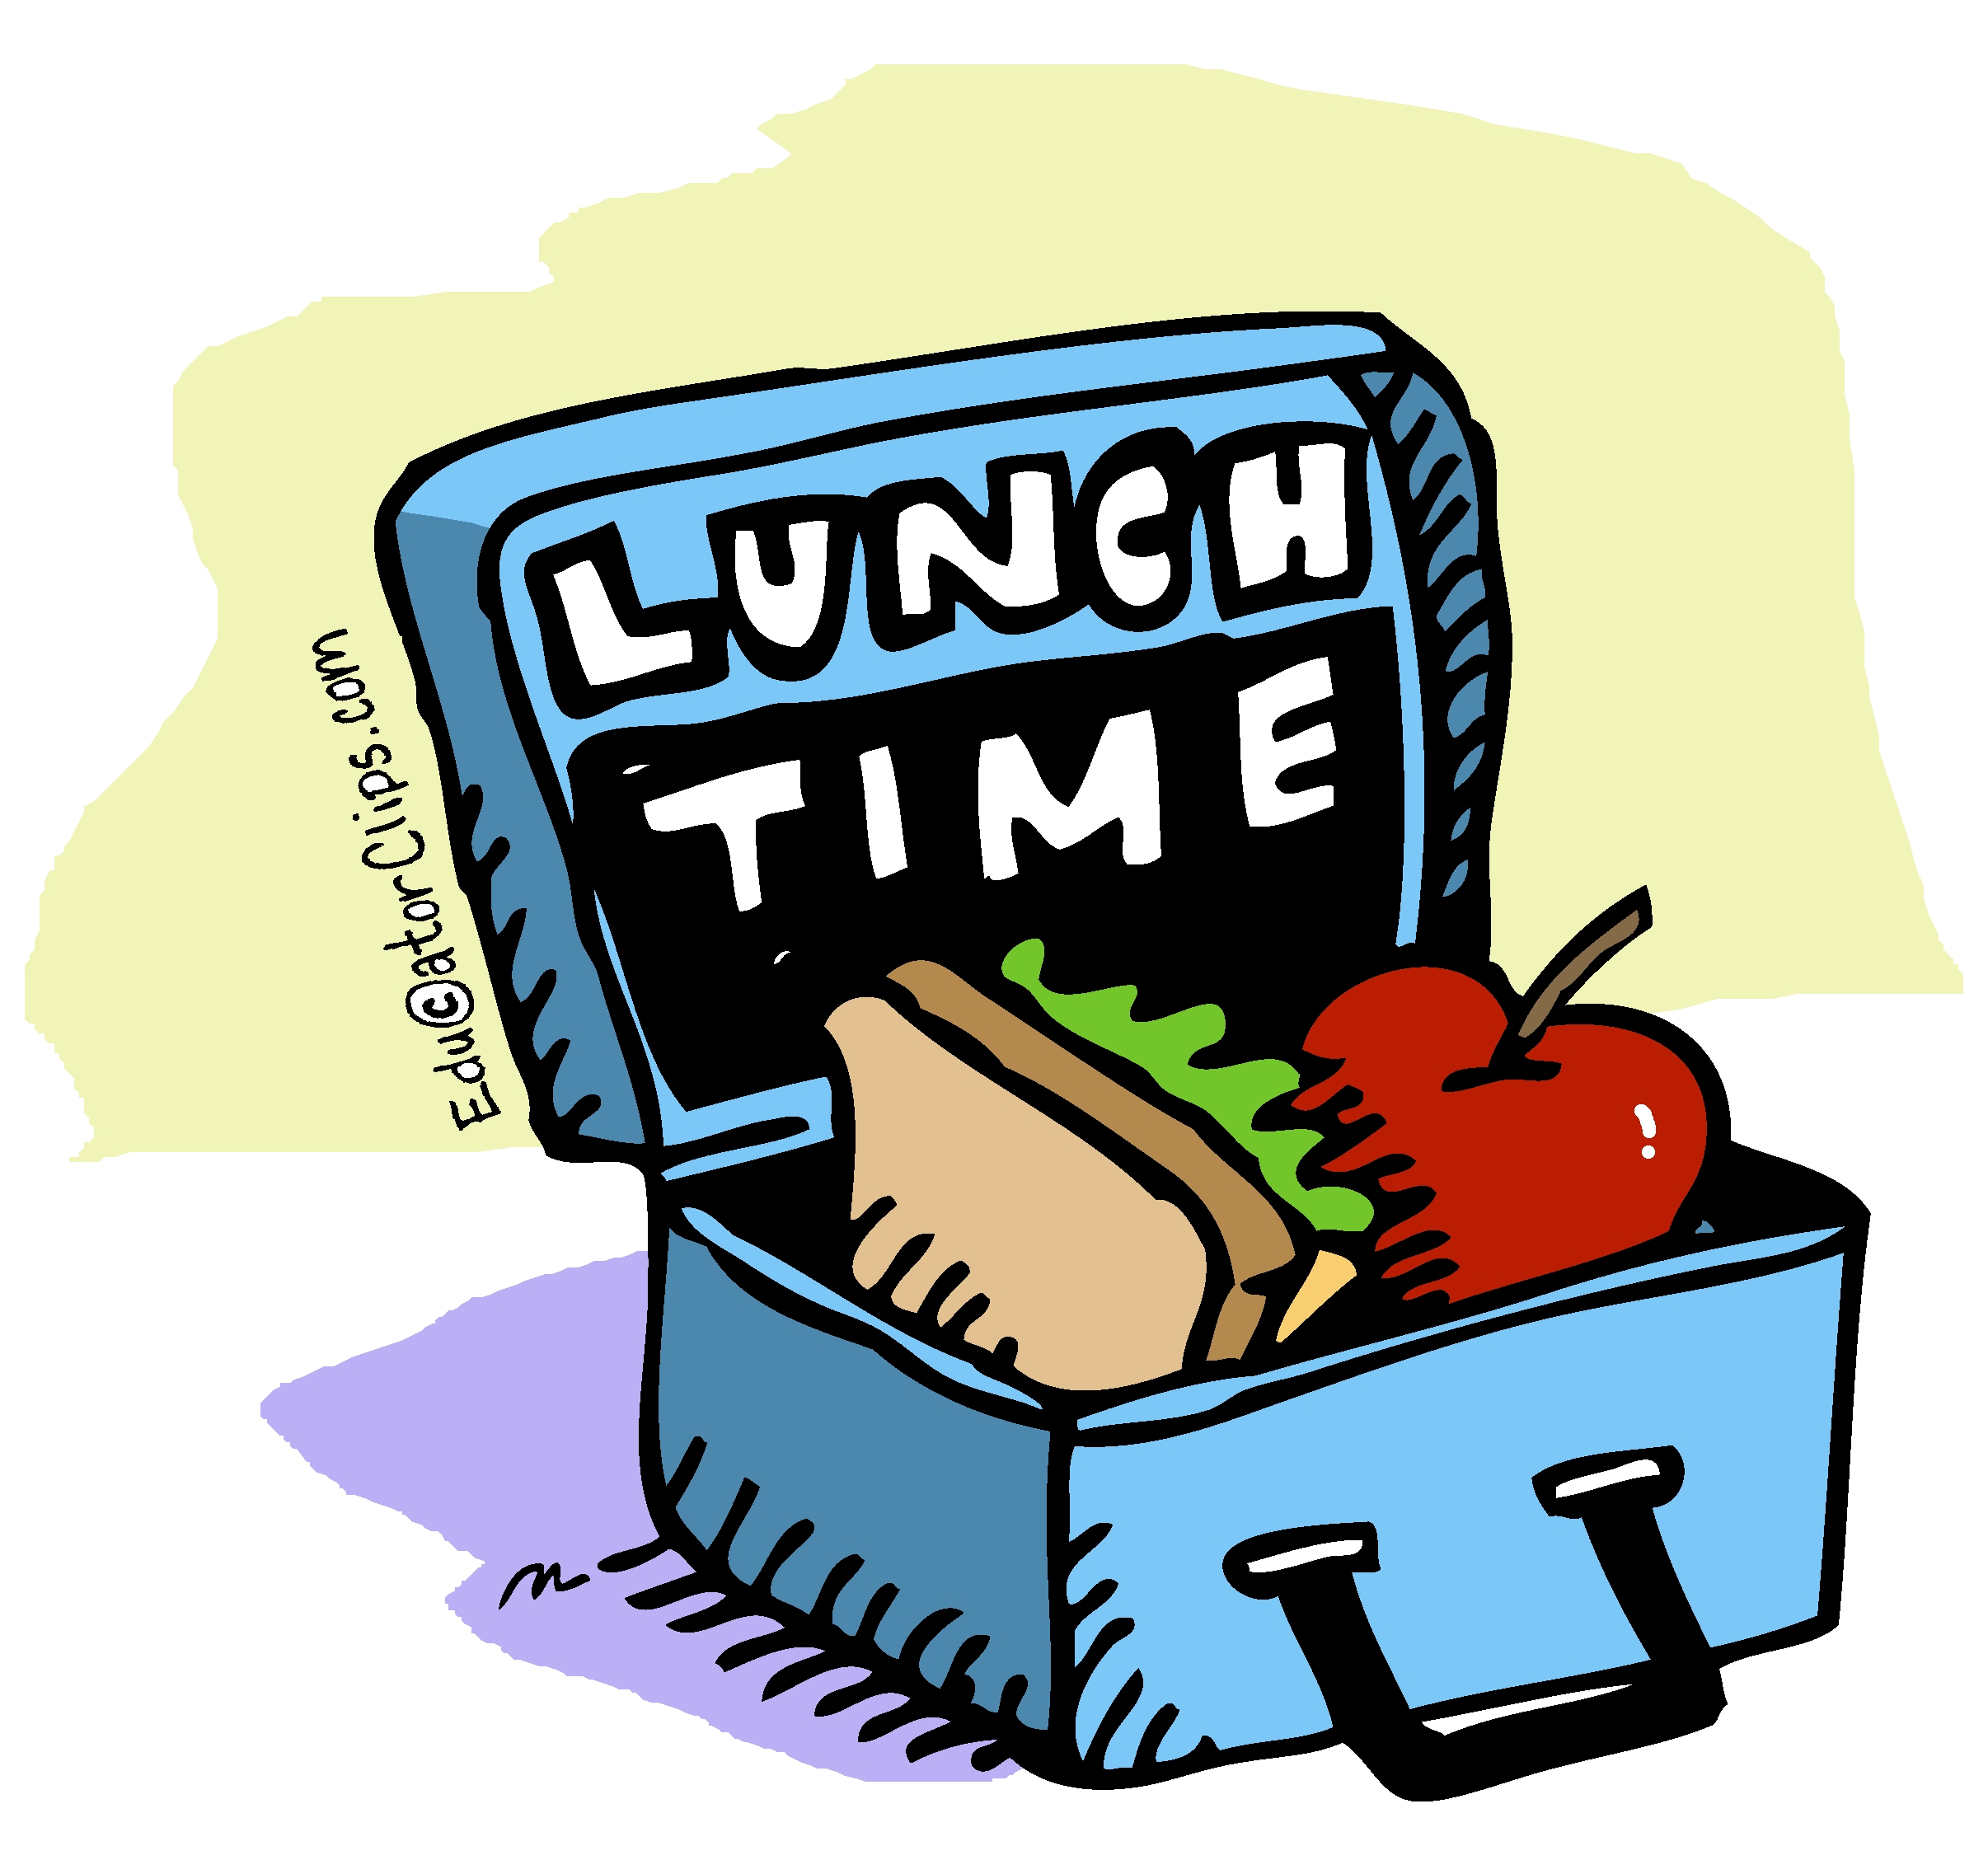 Fast Food Menu Lunch Clip Art At Clker - Eat Lunch - Free - Clip Art ...